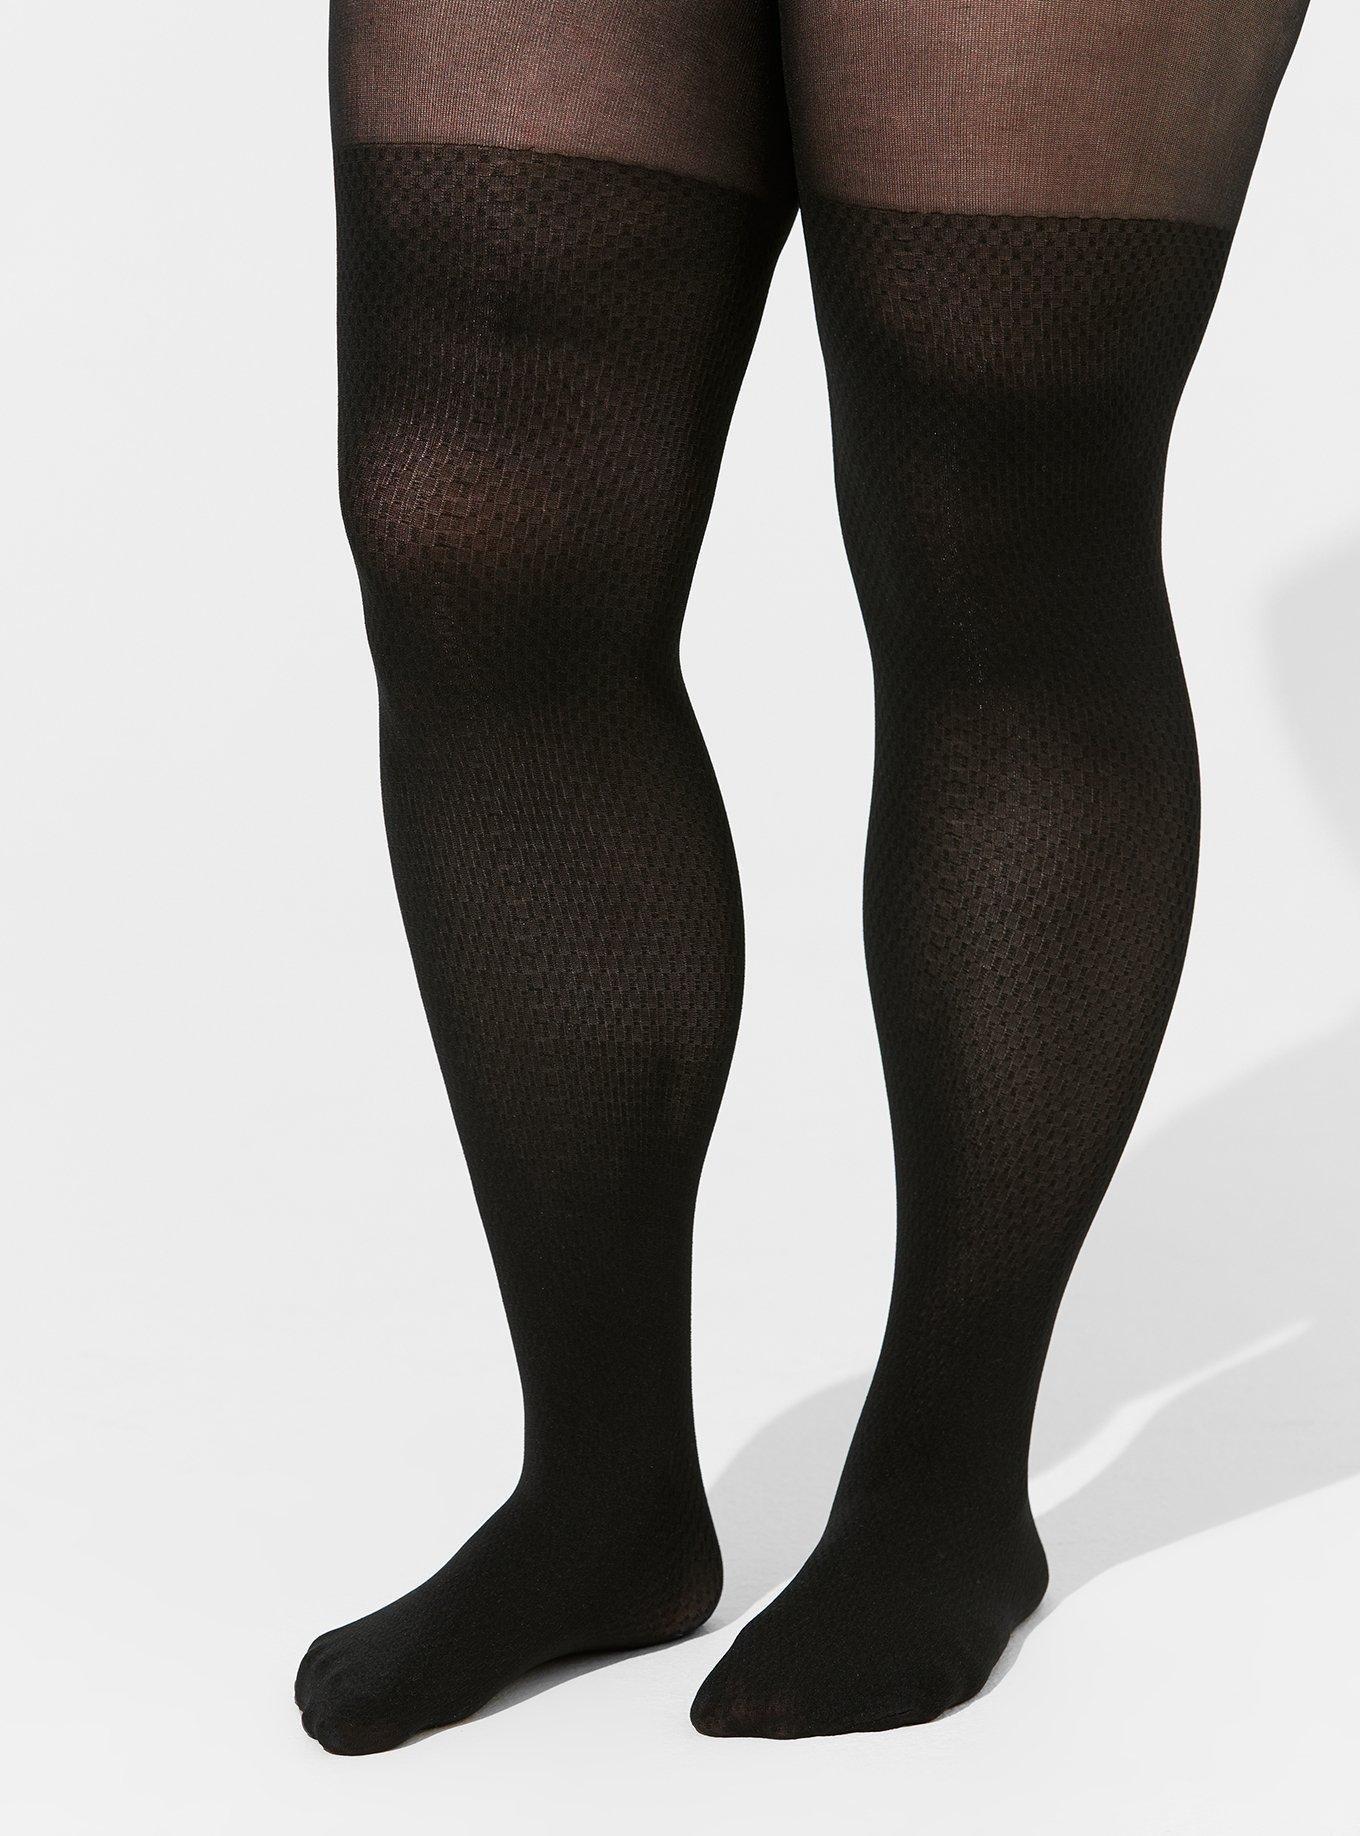 Plus Size - Checkered Tights - Torrid